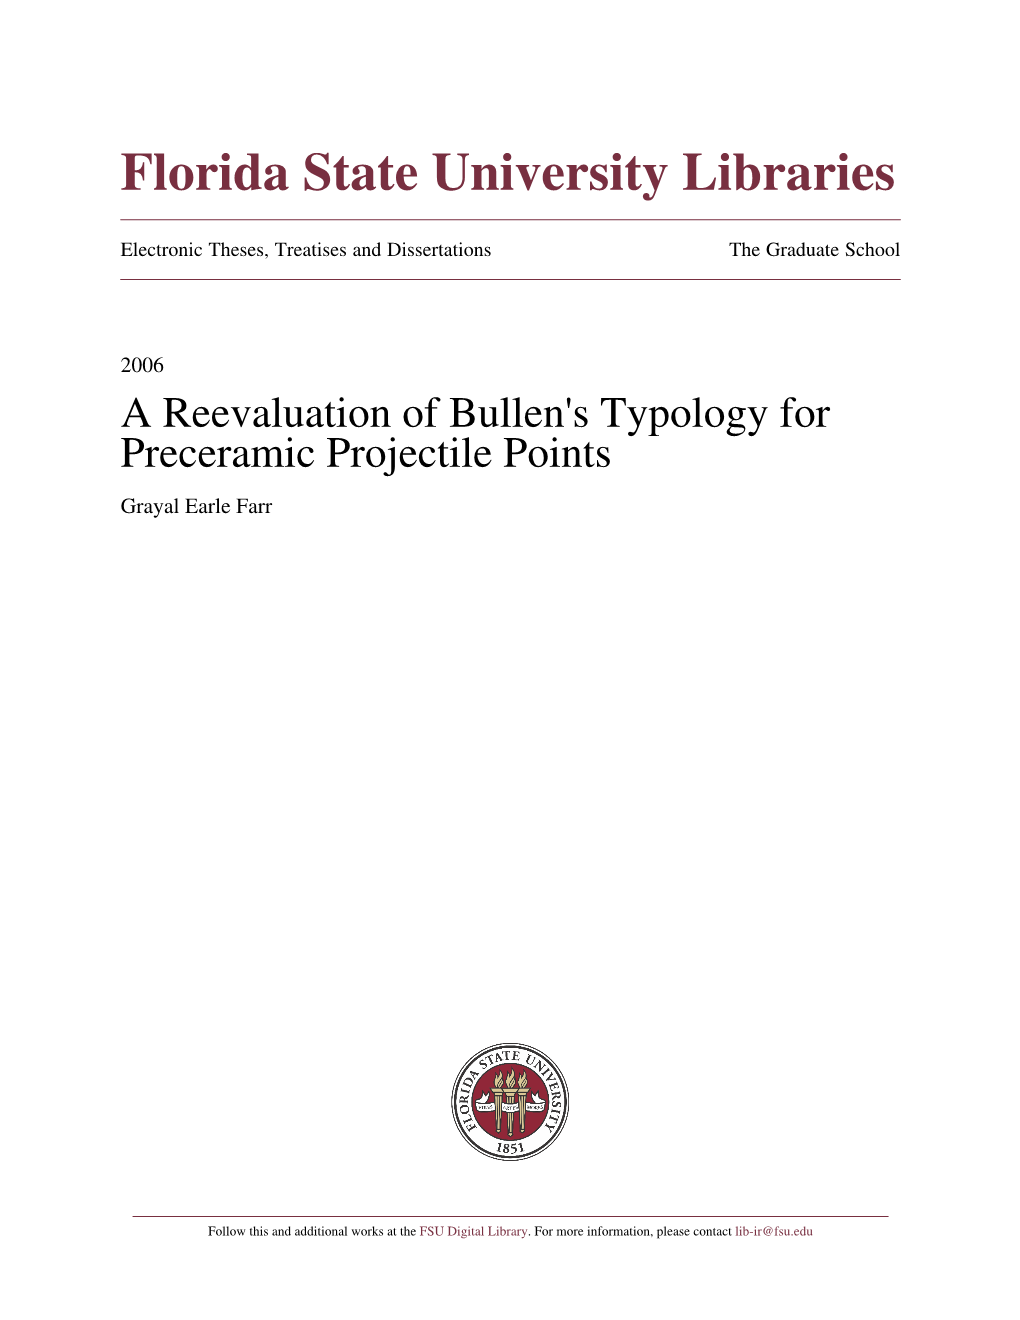 A Reevaluation of Bullen's Typology for Preceramic Projectile Points Grayal Earle Farr